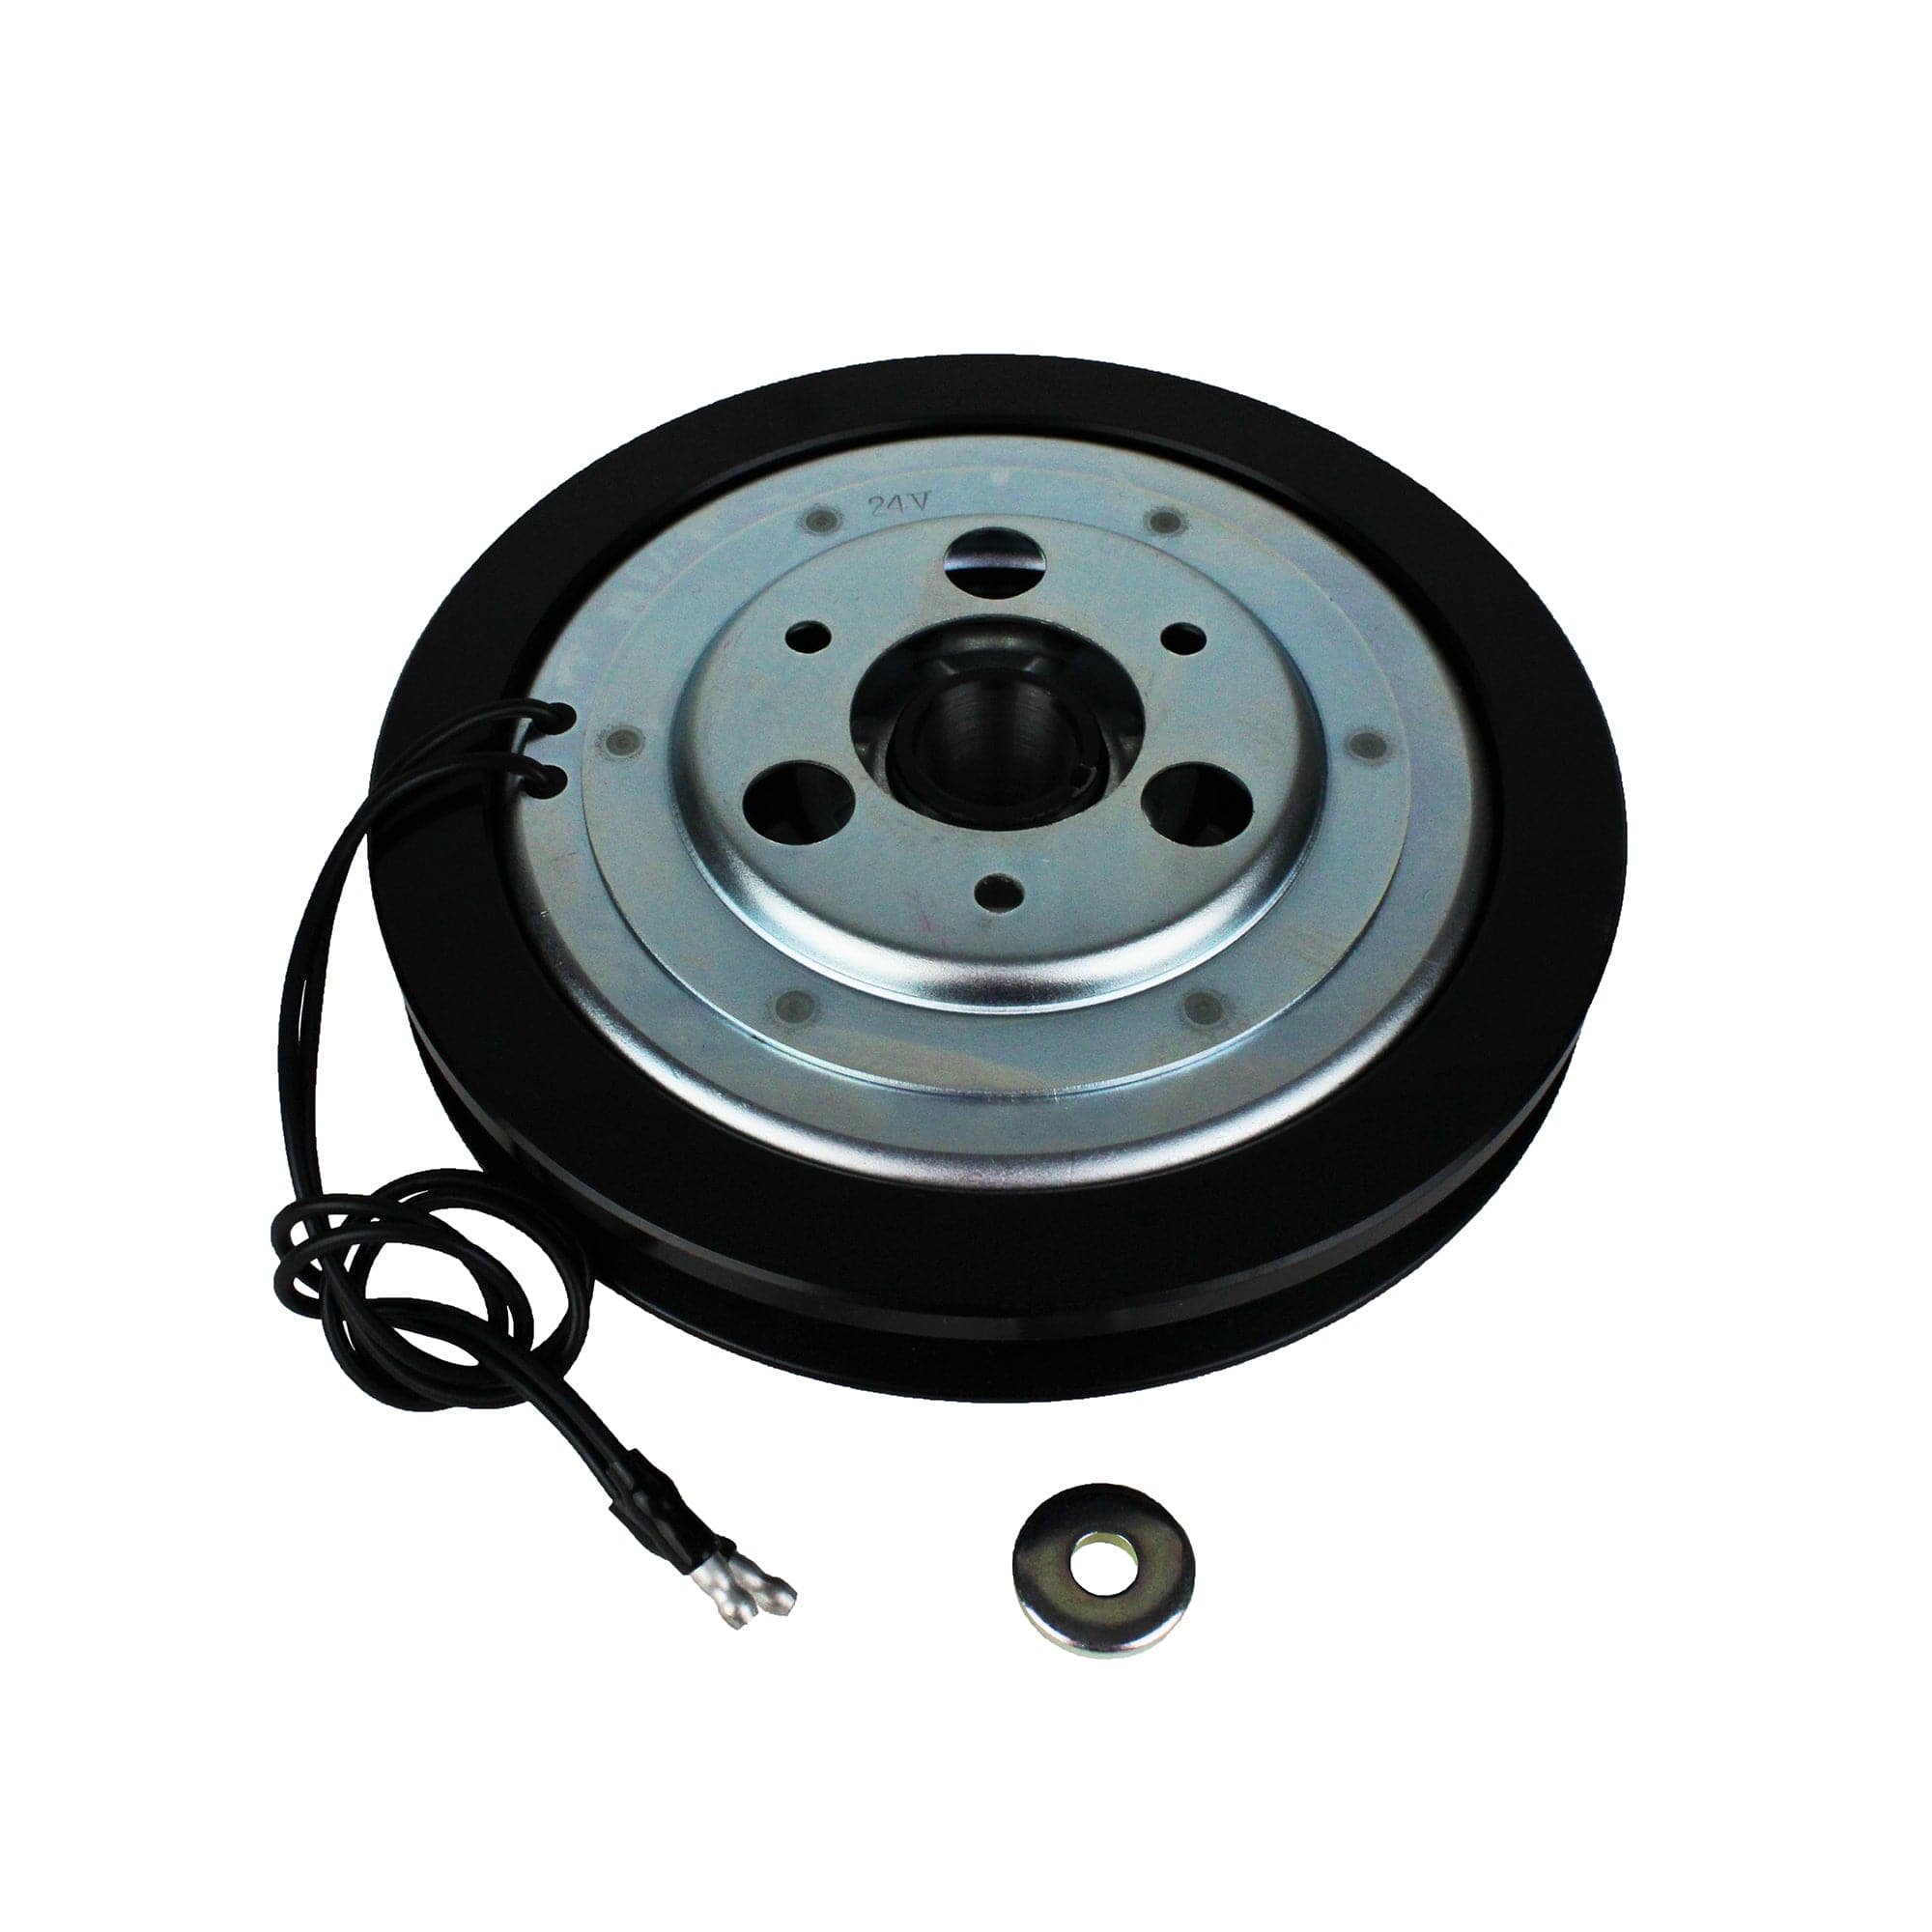 Johnson Pump 0.3454.004 7" Electro Magnetic Clutch Pulley, 24V, 1xB